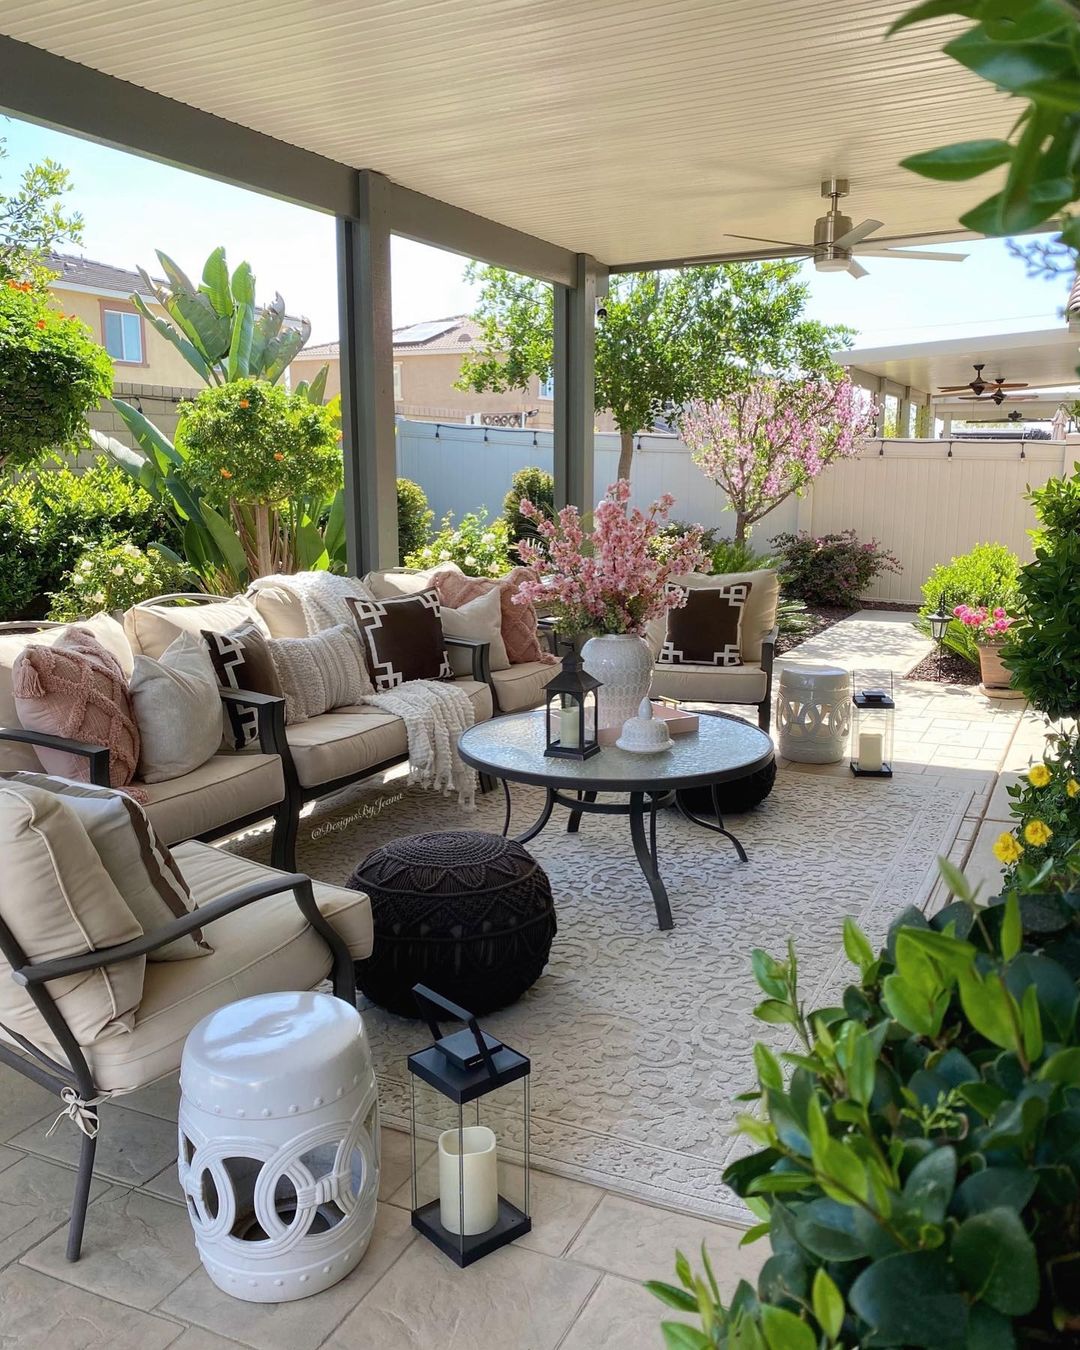 Backyard Living Space with Large Couch. Photo by Instagram user @designsbyjeana